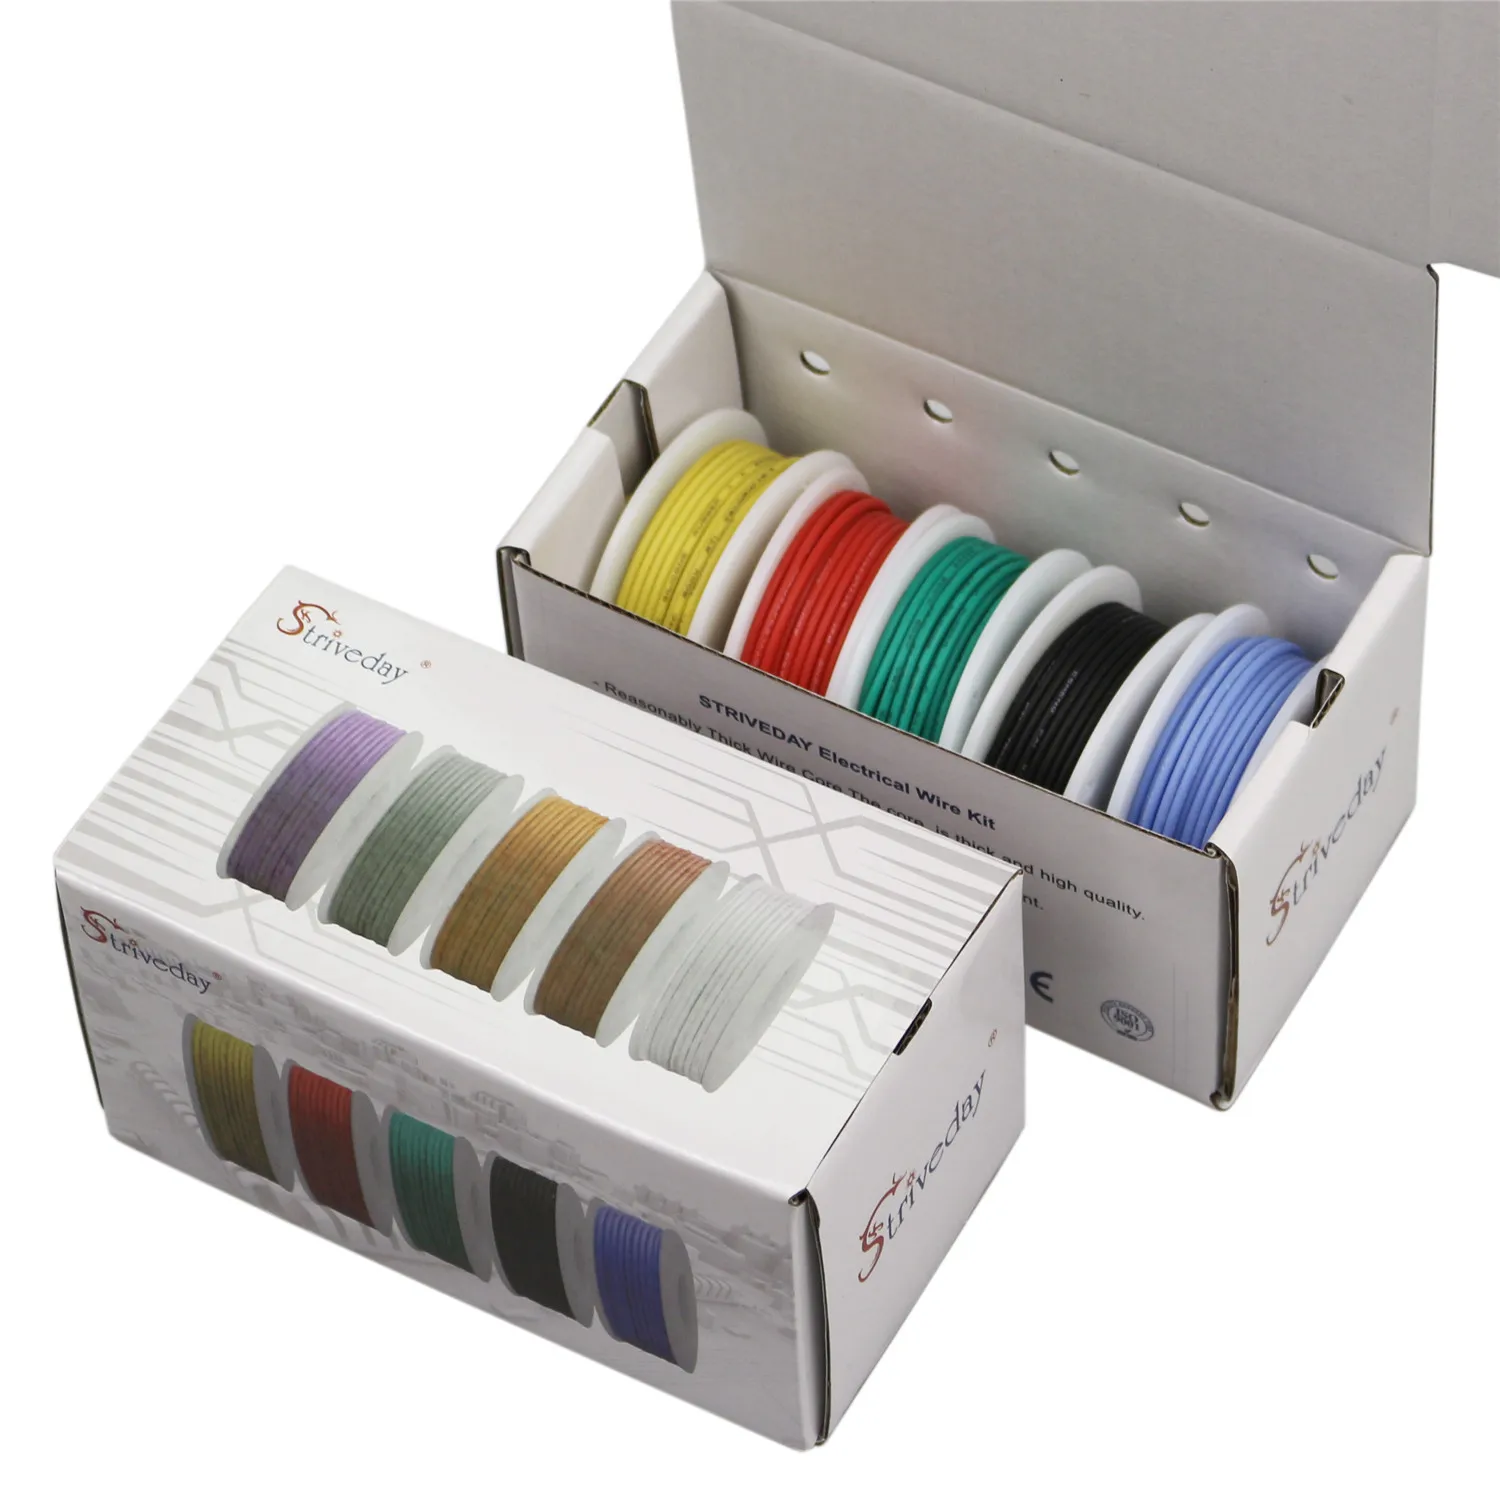 5 Color Box 1 30AWG 50m Flexible Silicone Wire Electronic Stranding Tinned Cable 